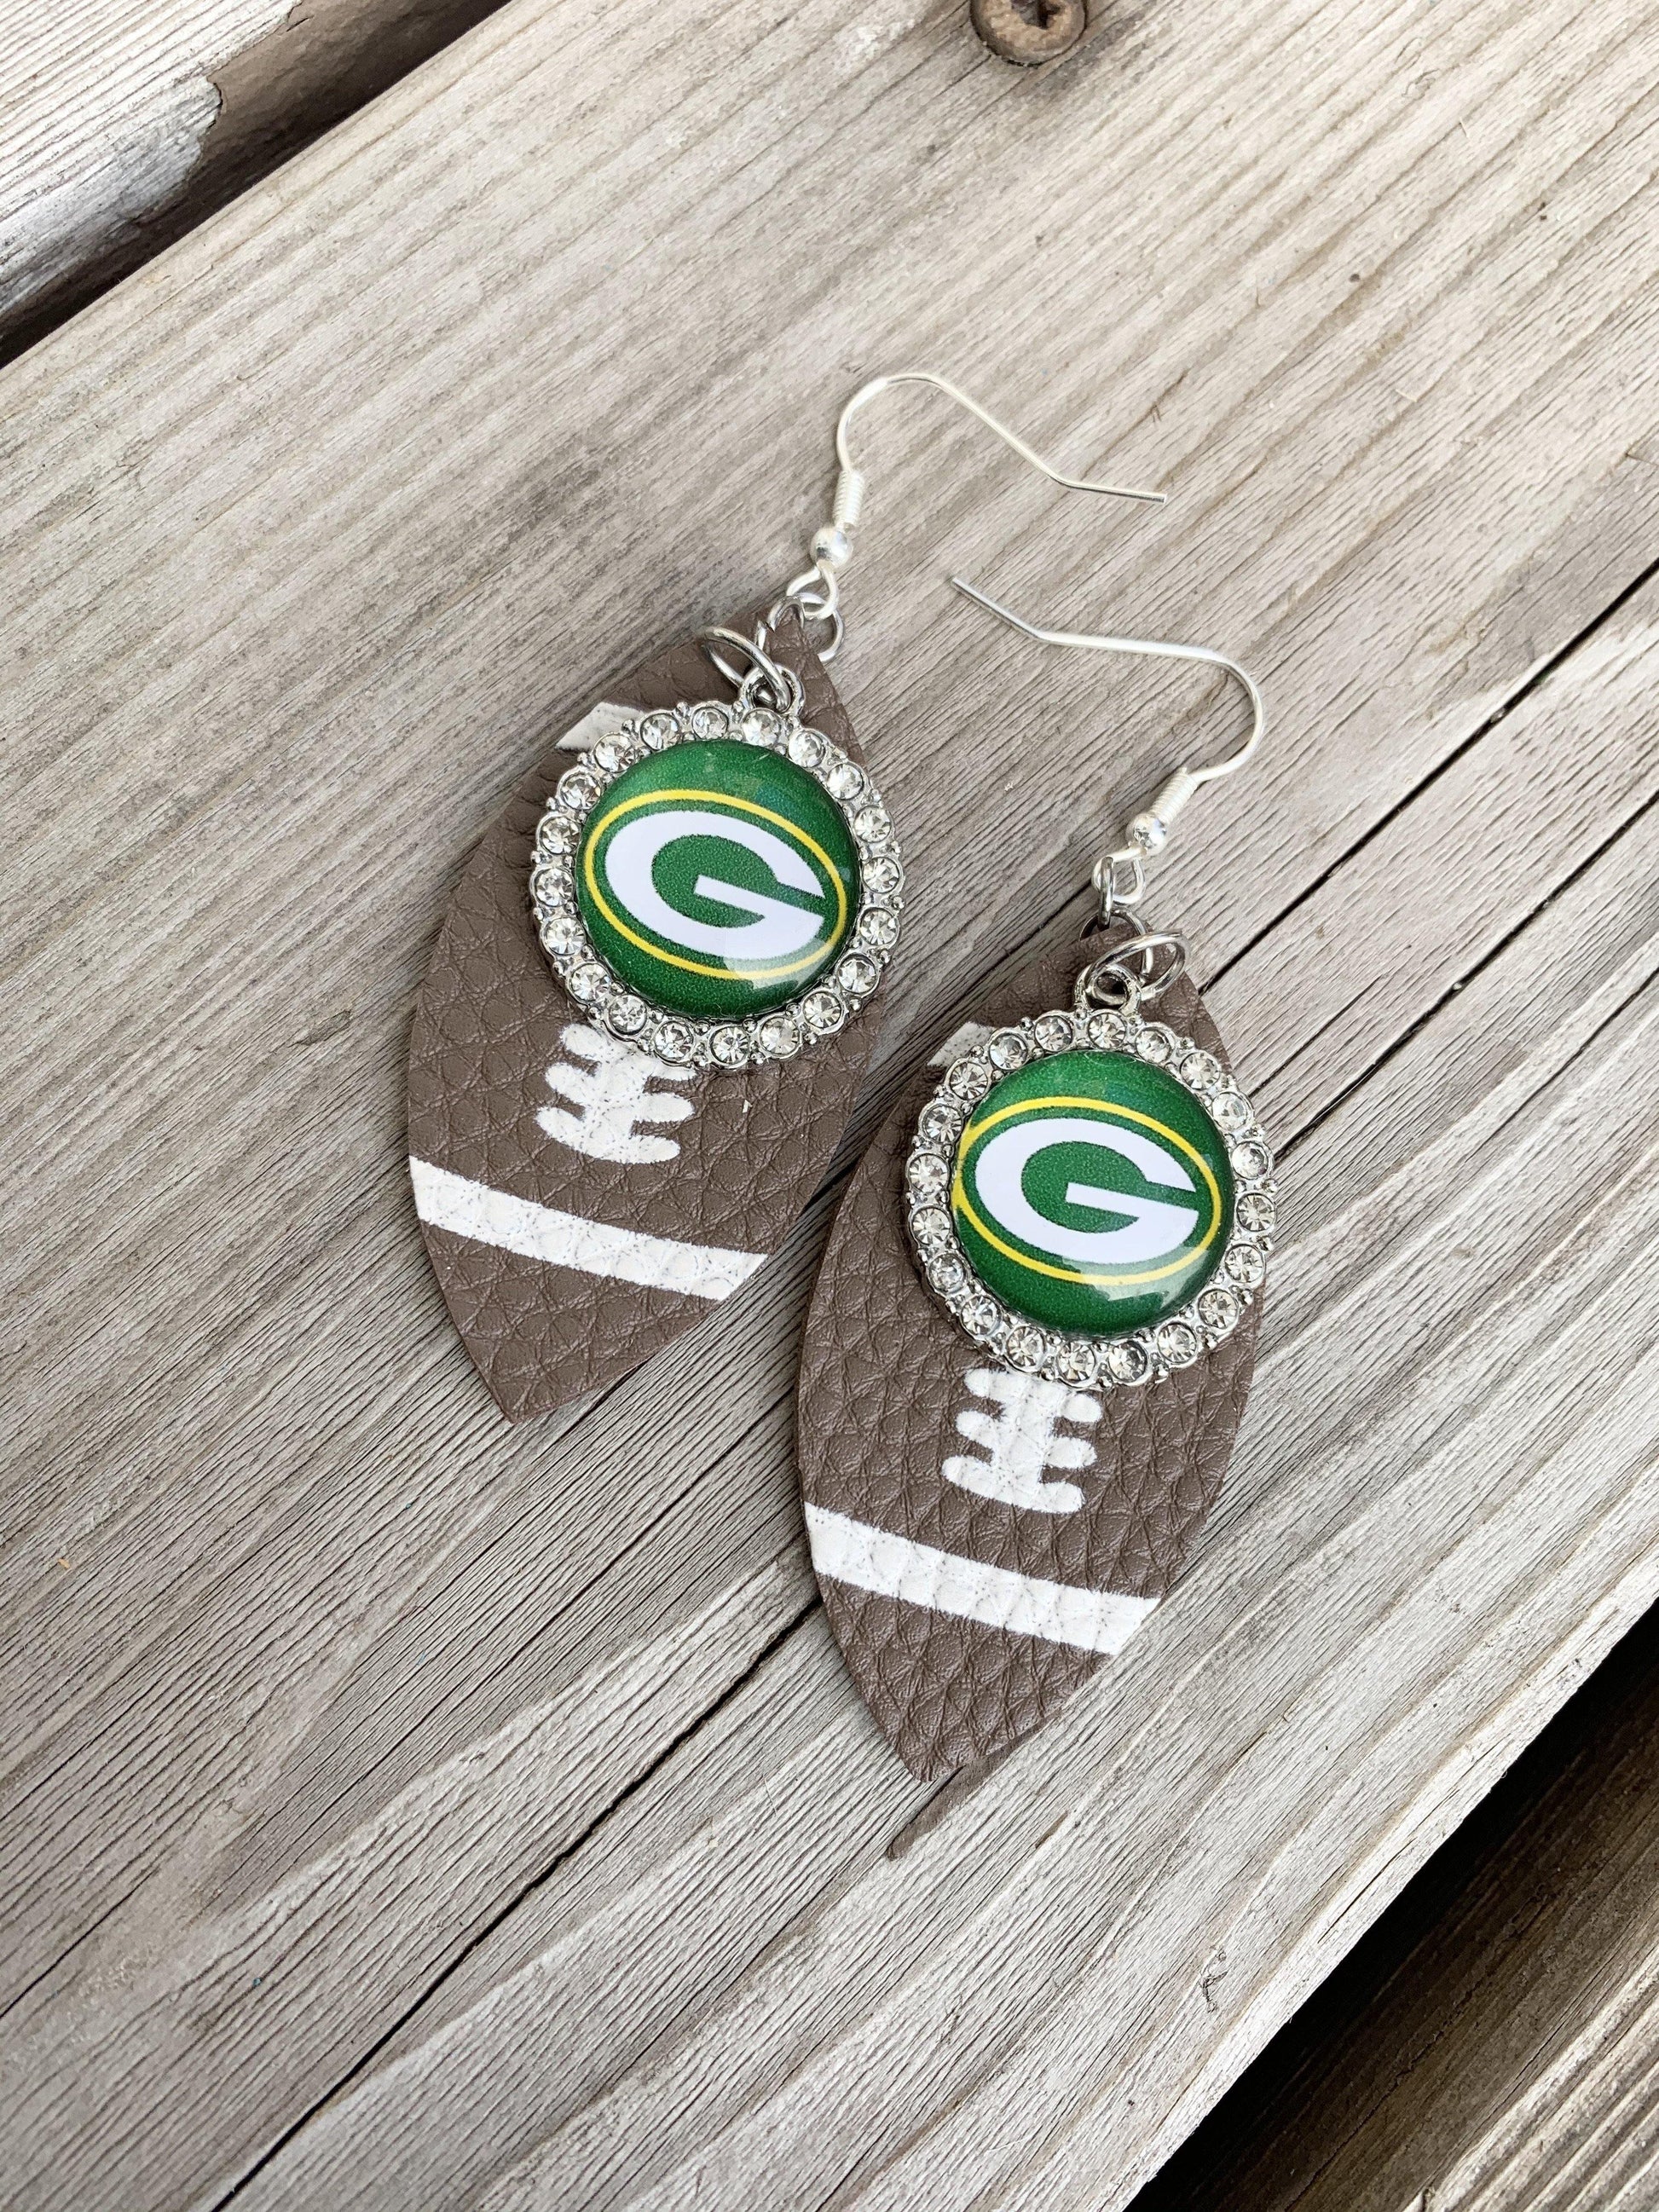 Green Bay Packers | Football jewelry | Necklaces | Earrings | Bracelets | Keychains - Stacy's Pink Martini Boutique